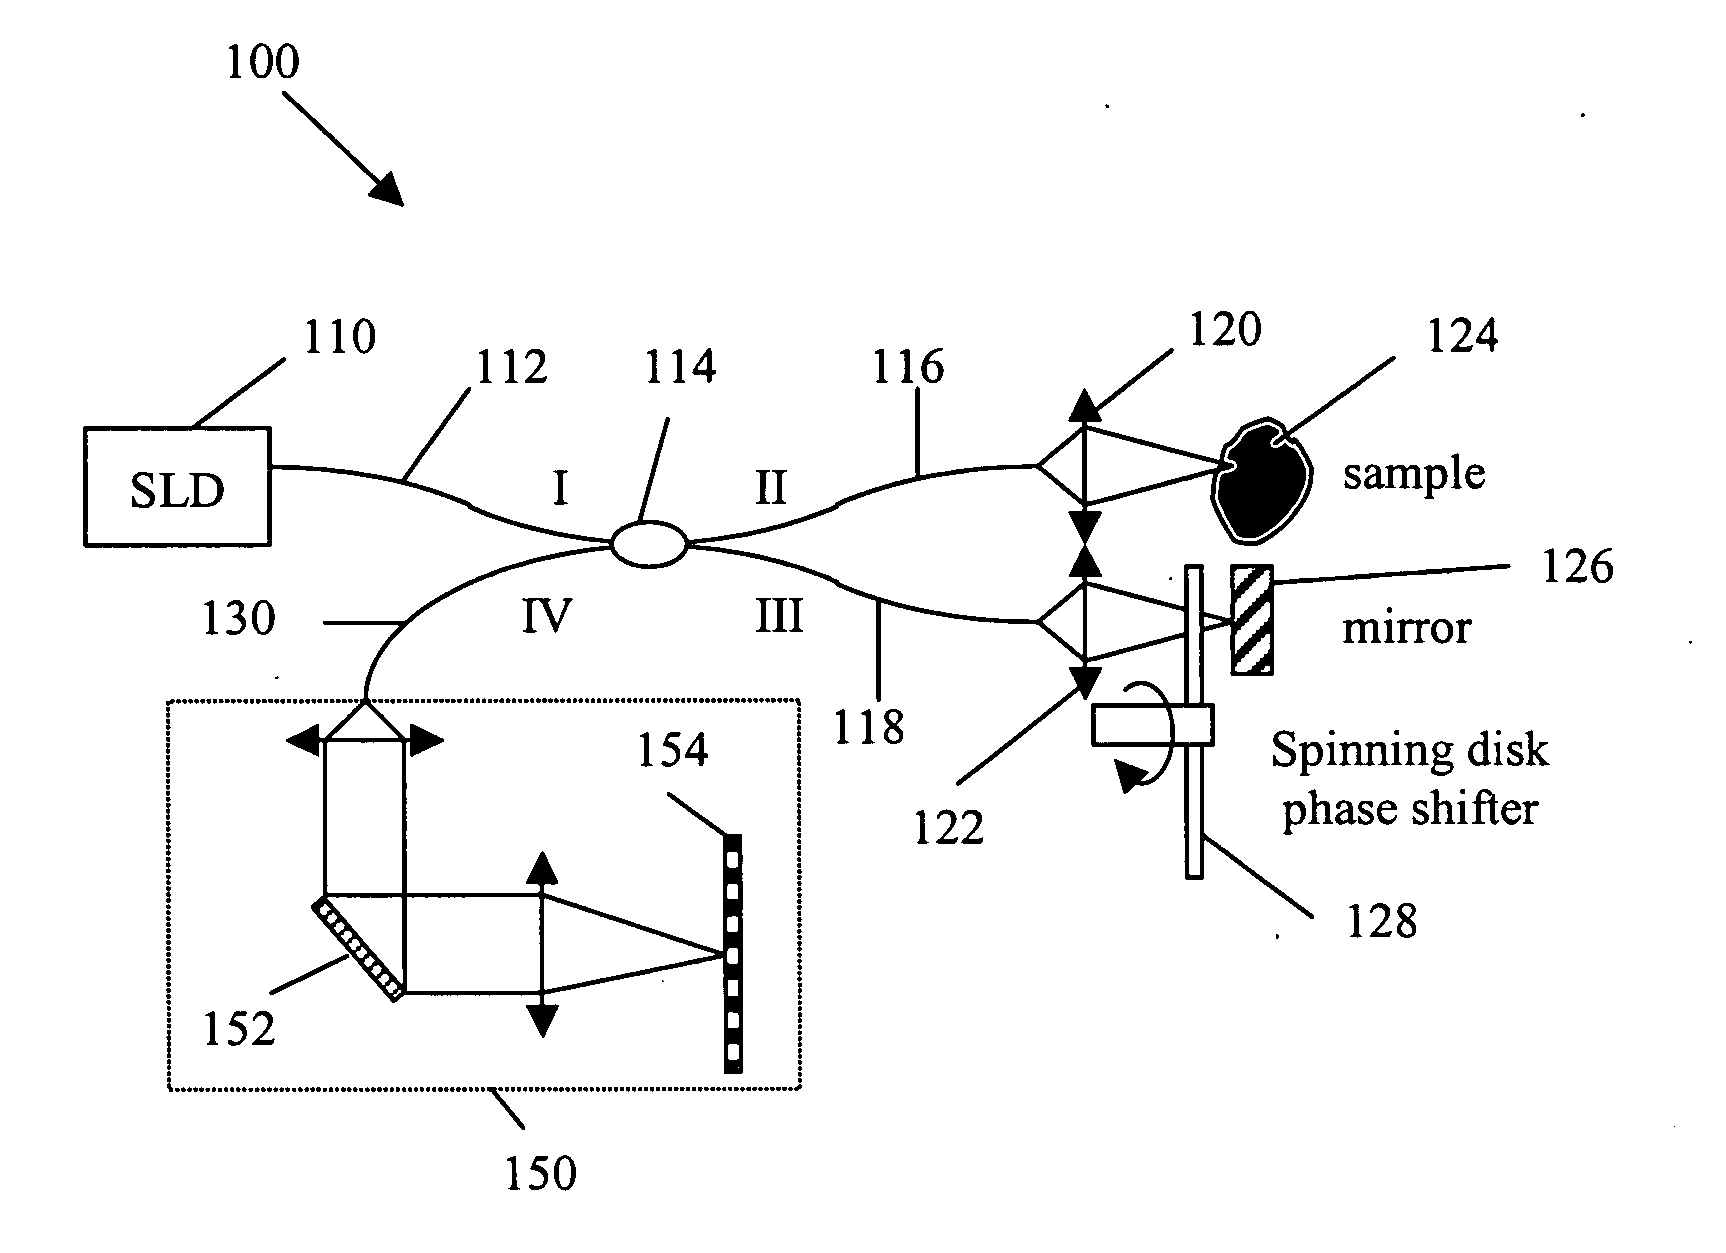 Patterned spinning disk based optical phase shifter for spectral domain optical coherence tomography